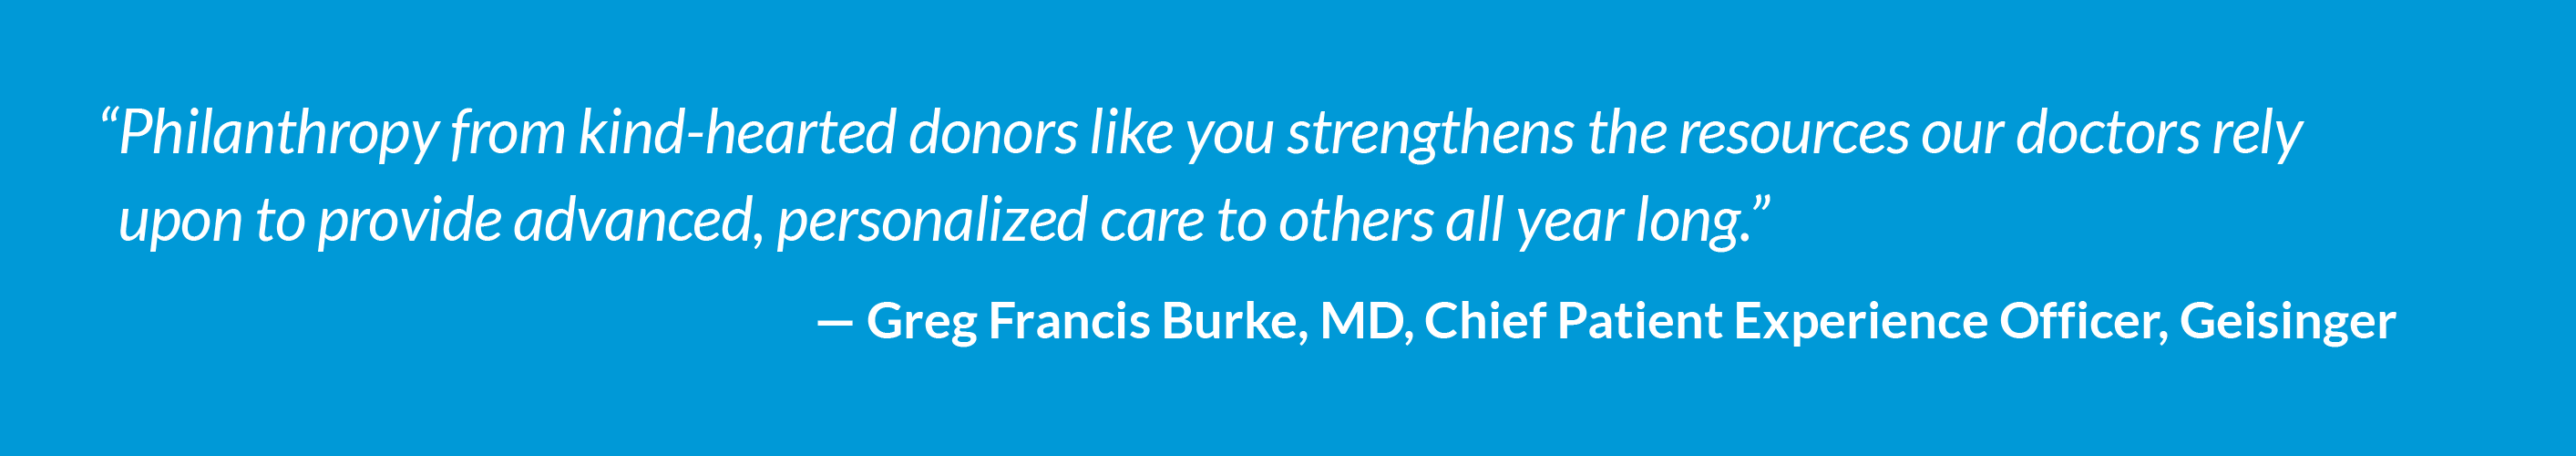 "Philanthropy from kind-hearted donors like you strengthens the resources our doctors rely upon to provide advanced, personalized care to others all year long." - Greg Francis Burke, MD, Chief Patient Experience Officer, Geisinger